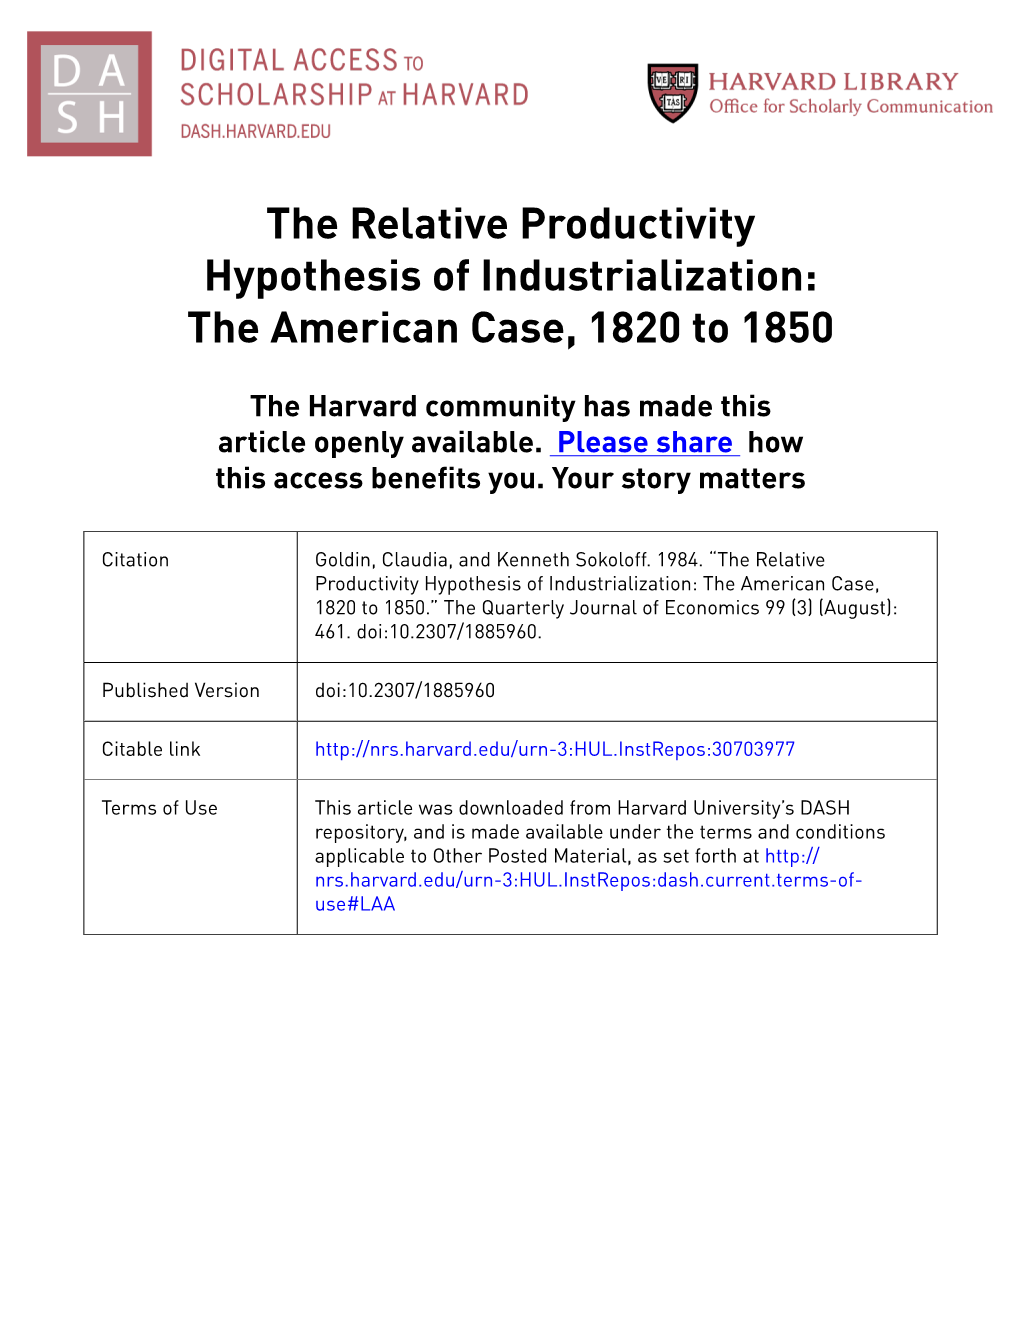 The Relative Productivity Hypothesis of Industrialization: the American Case, 1820 to 1850